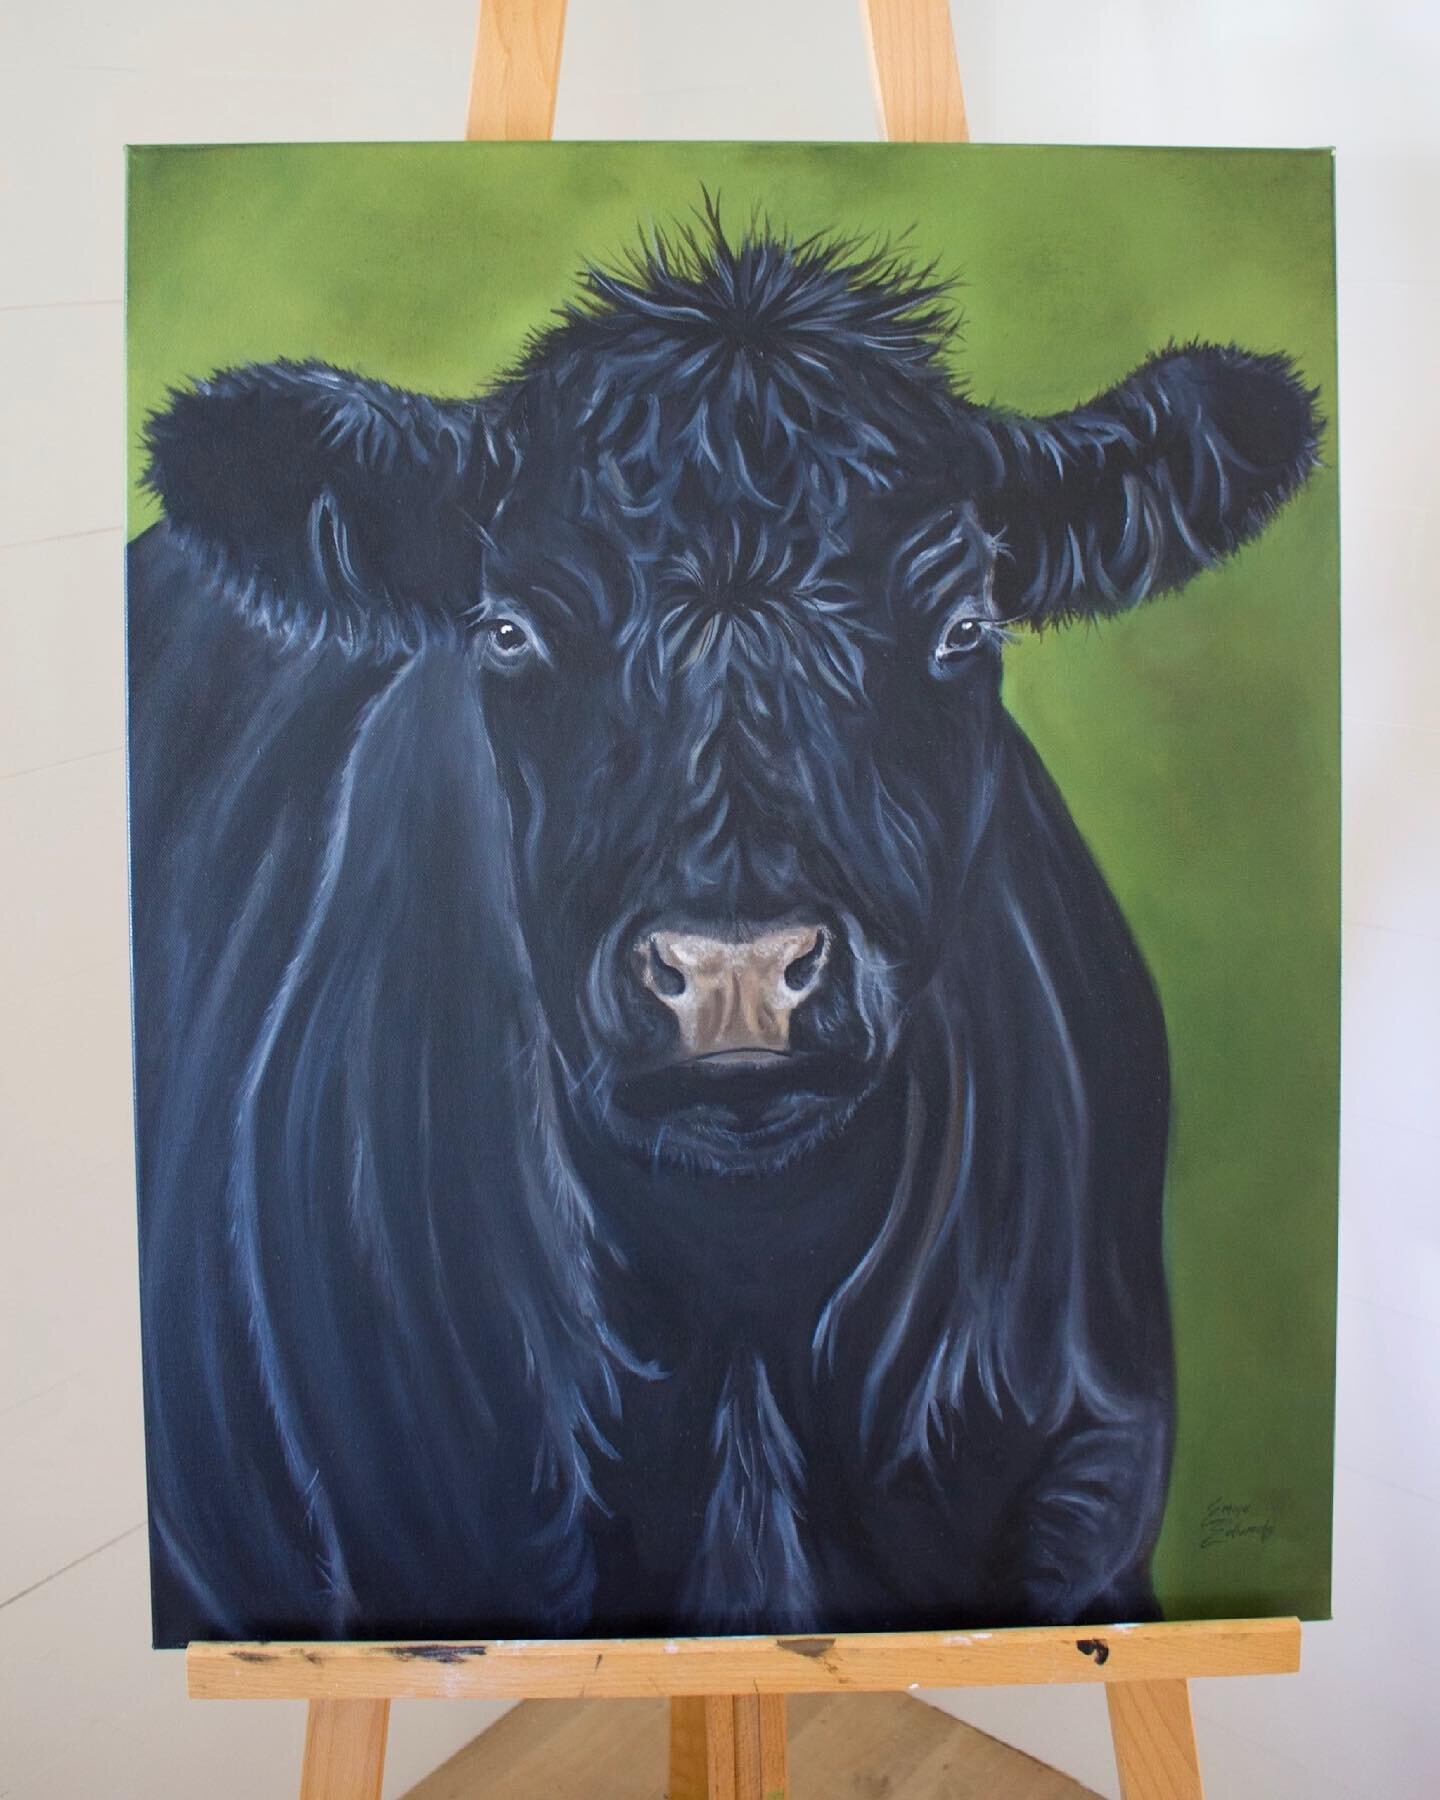 I heard it was National Black Cow Day so I had share this painting! I&rsquo;d love to paint a Highland next. 🐄 
.
.
.
#smallbizz #artiststudiolife #oilpainter #oilartist #oilpaintingartist #animalpainting #anguscow #blackcow #farmhouseart #cowofthed